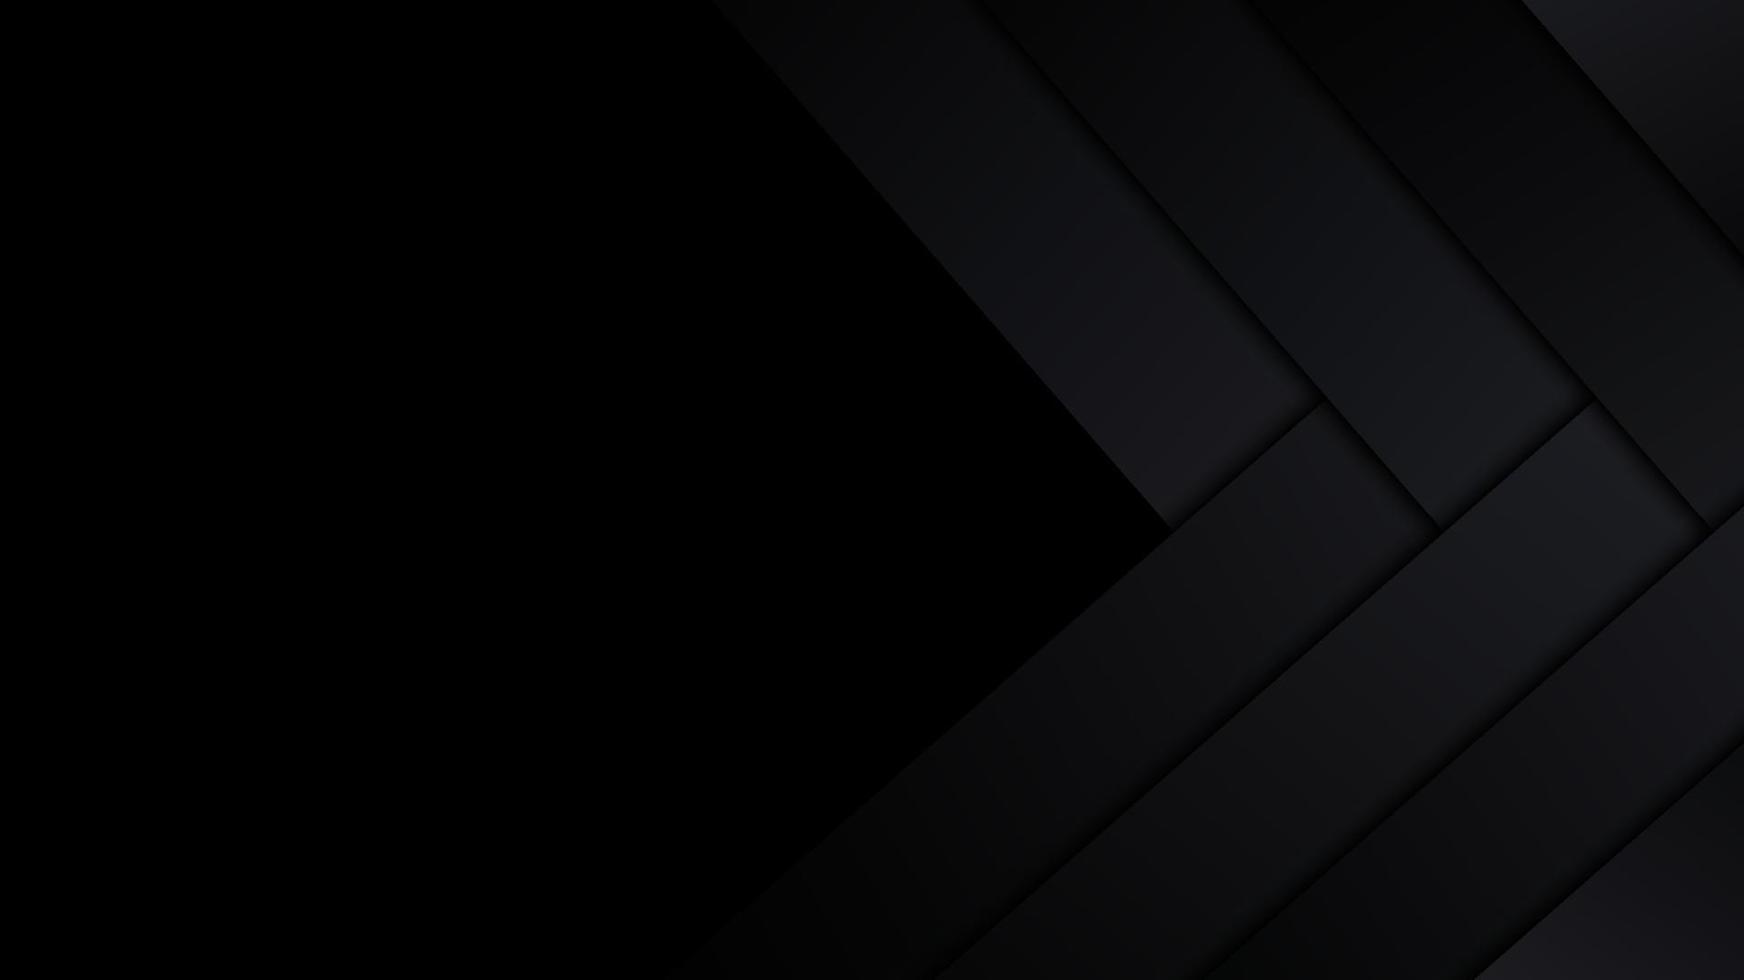 Abstract black stripes diagonal layered arrow on dark background luxury style vector